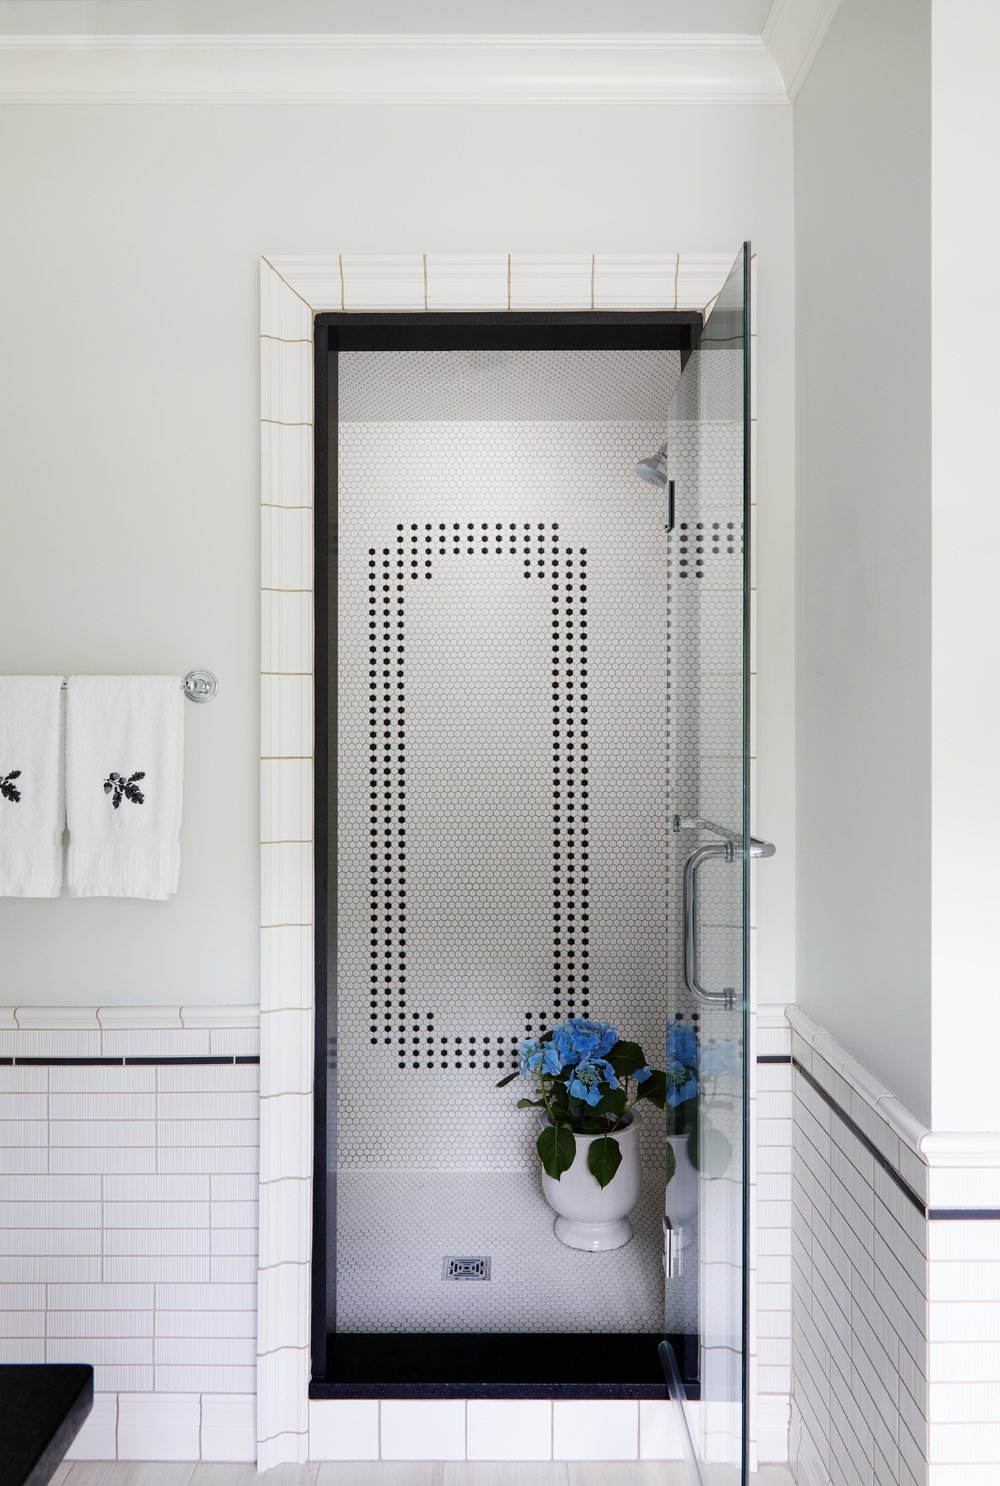 Classic black and whtie bathroom with walk in shower. Come see more interior design inspiration from Elizabeth Drake. Photo by Werner Straube. #interiordesign #classicdesign #traditionaldecor #housetour #elizabethdrake